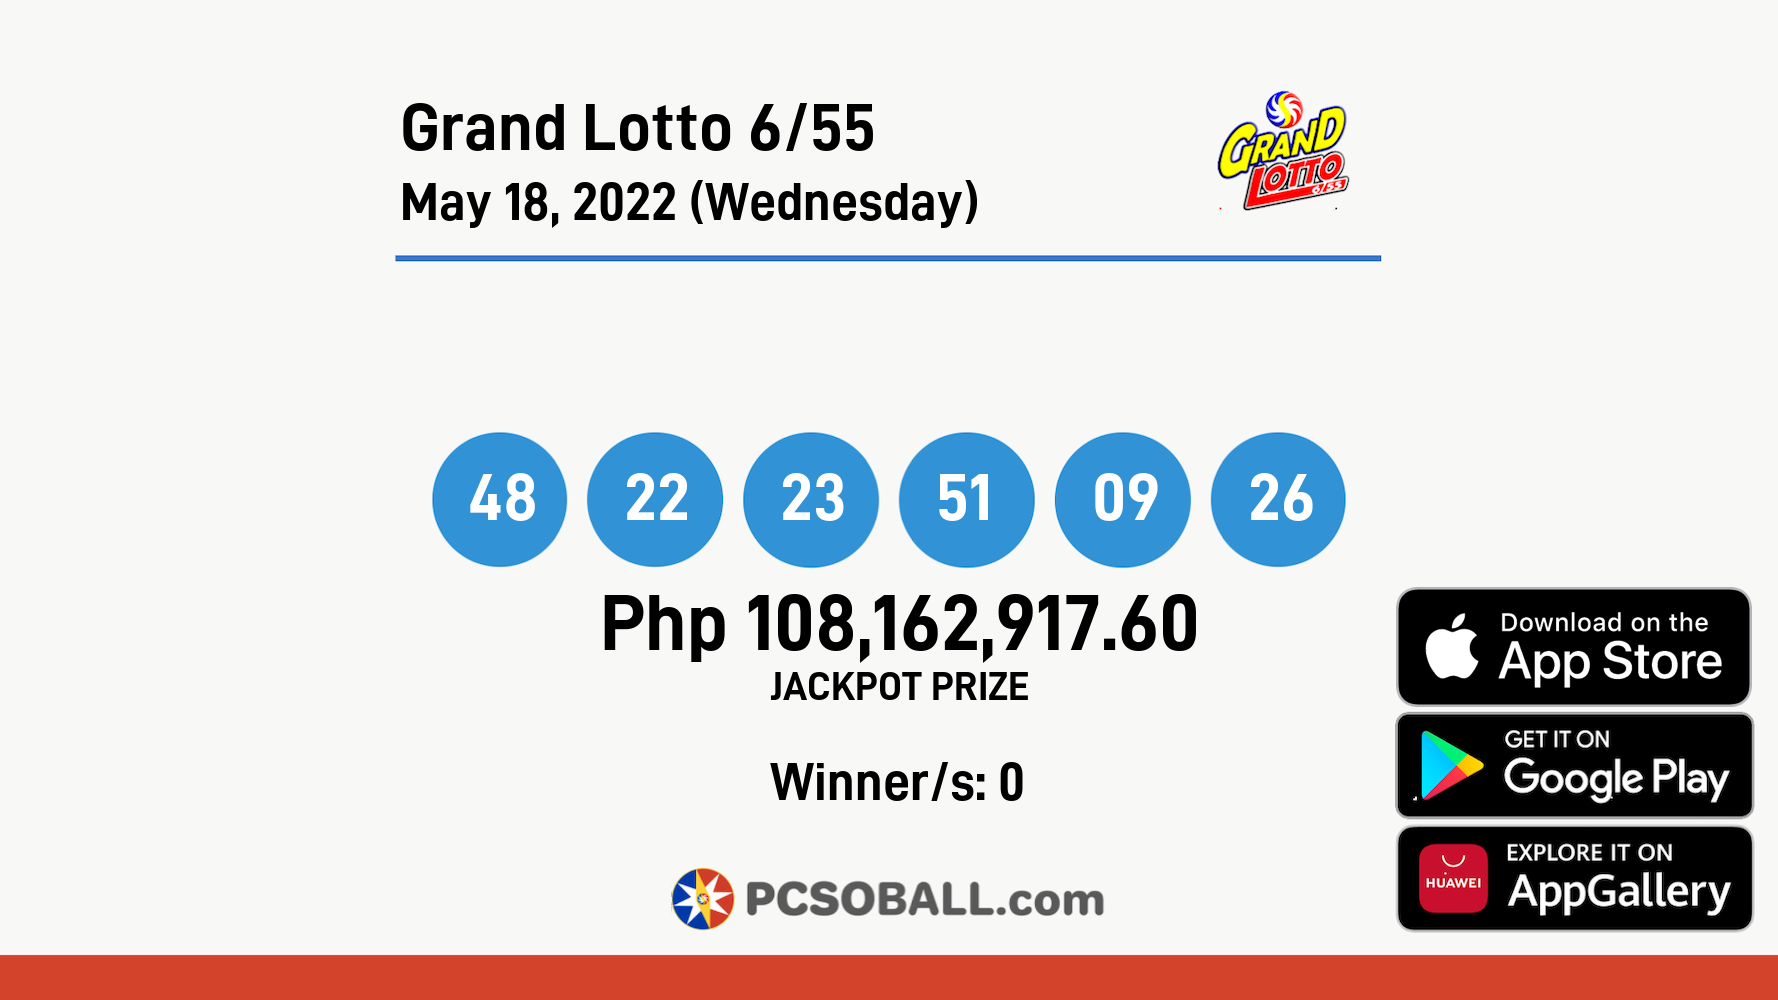 Grand Lotto 6/55 May 18, 2022 (Wednesday) Result